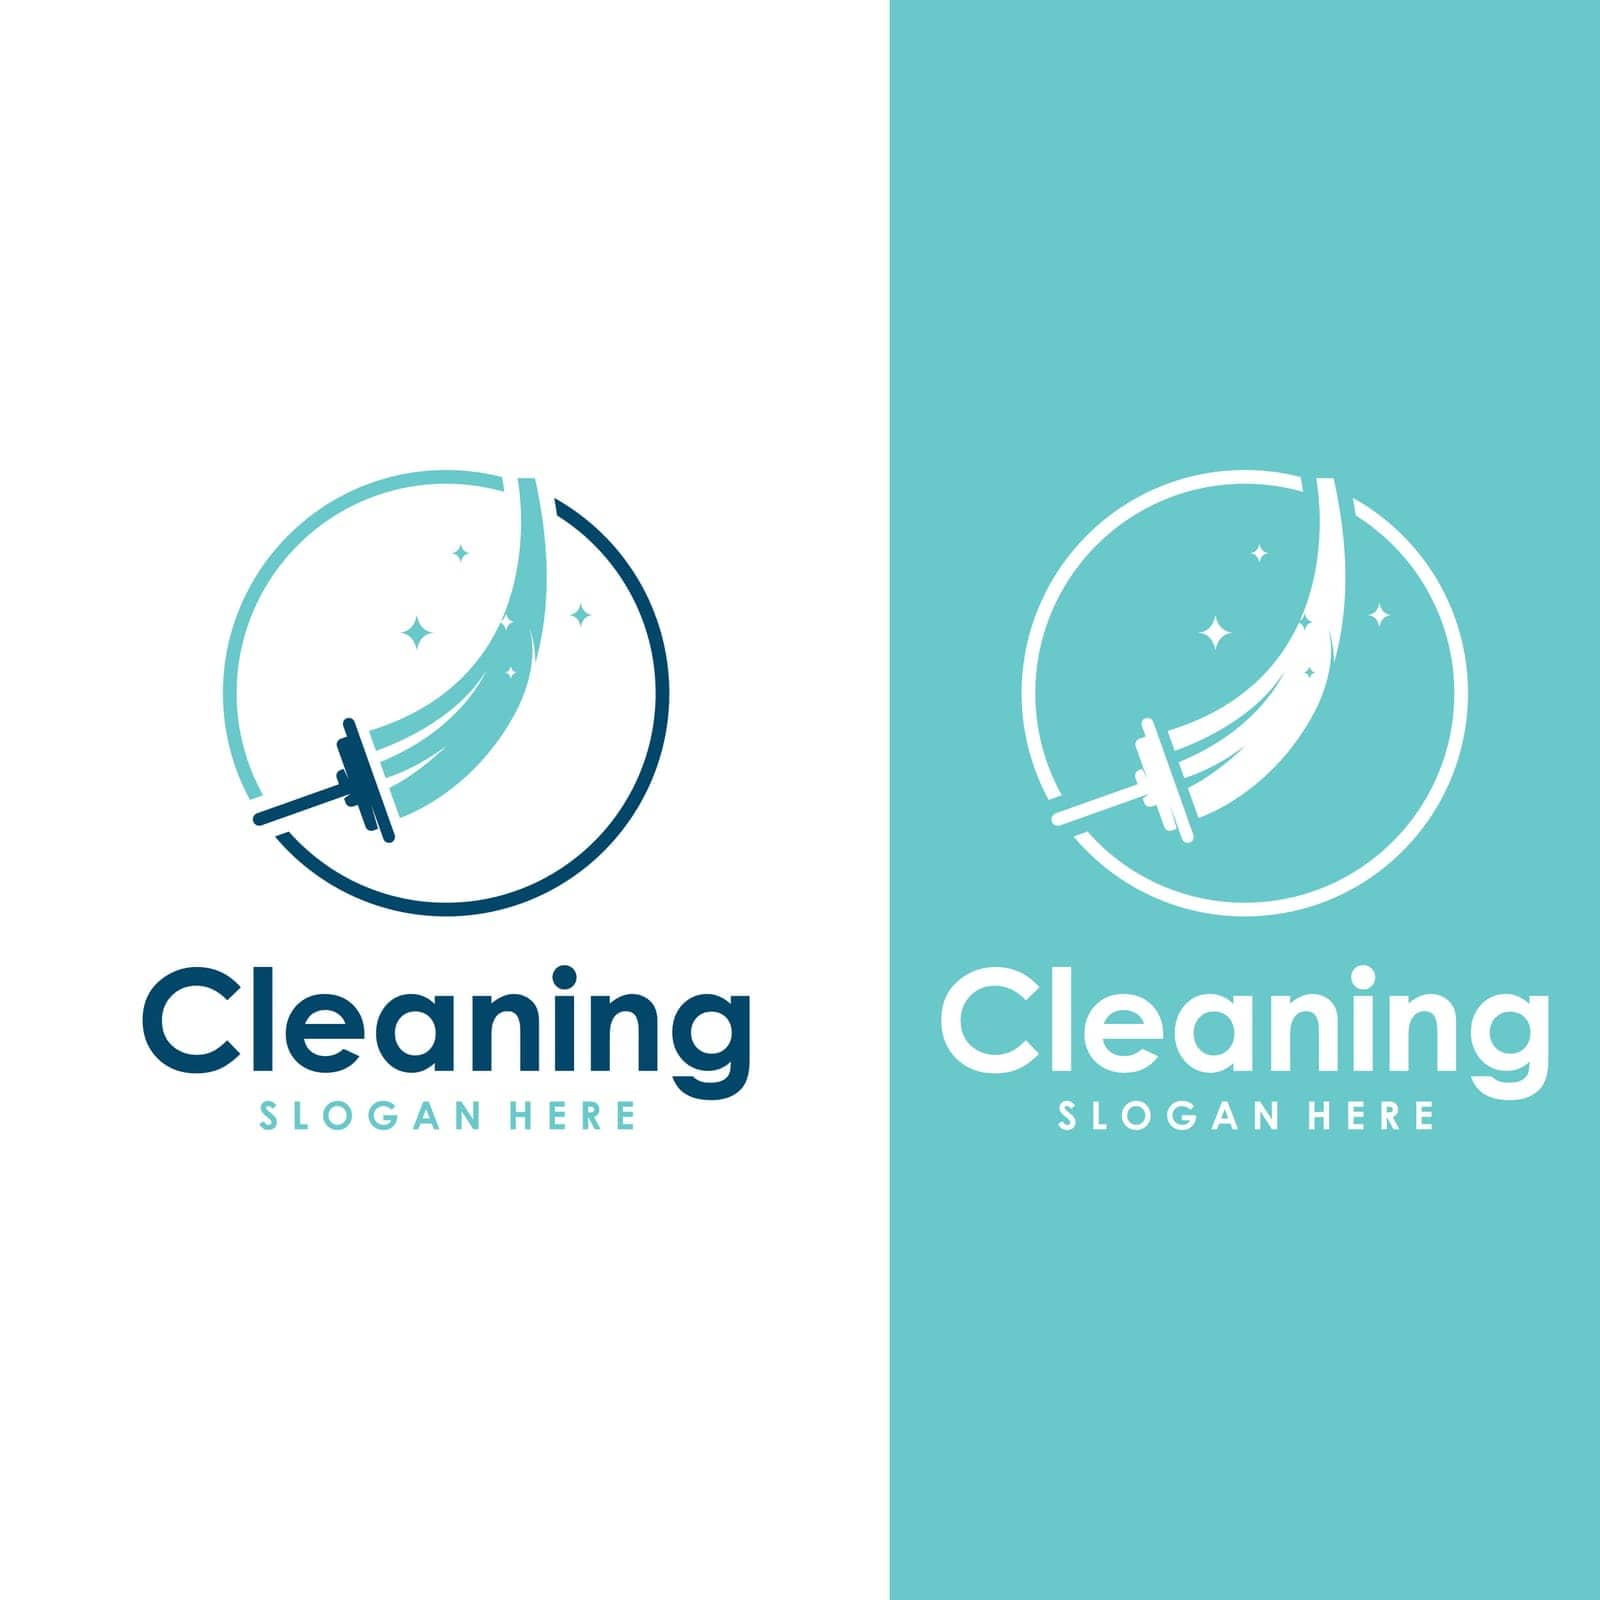 Cleaning logo, cleaning protection logo and house cleaning logo.With a template illustration vector design concept. by Mrsongrphc